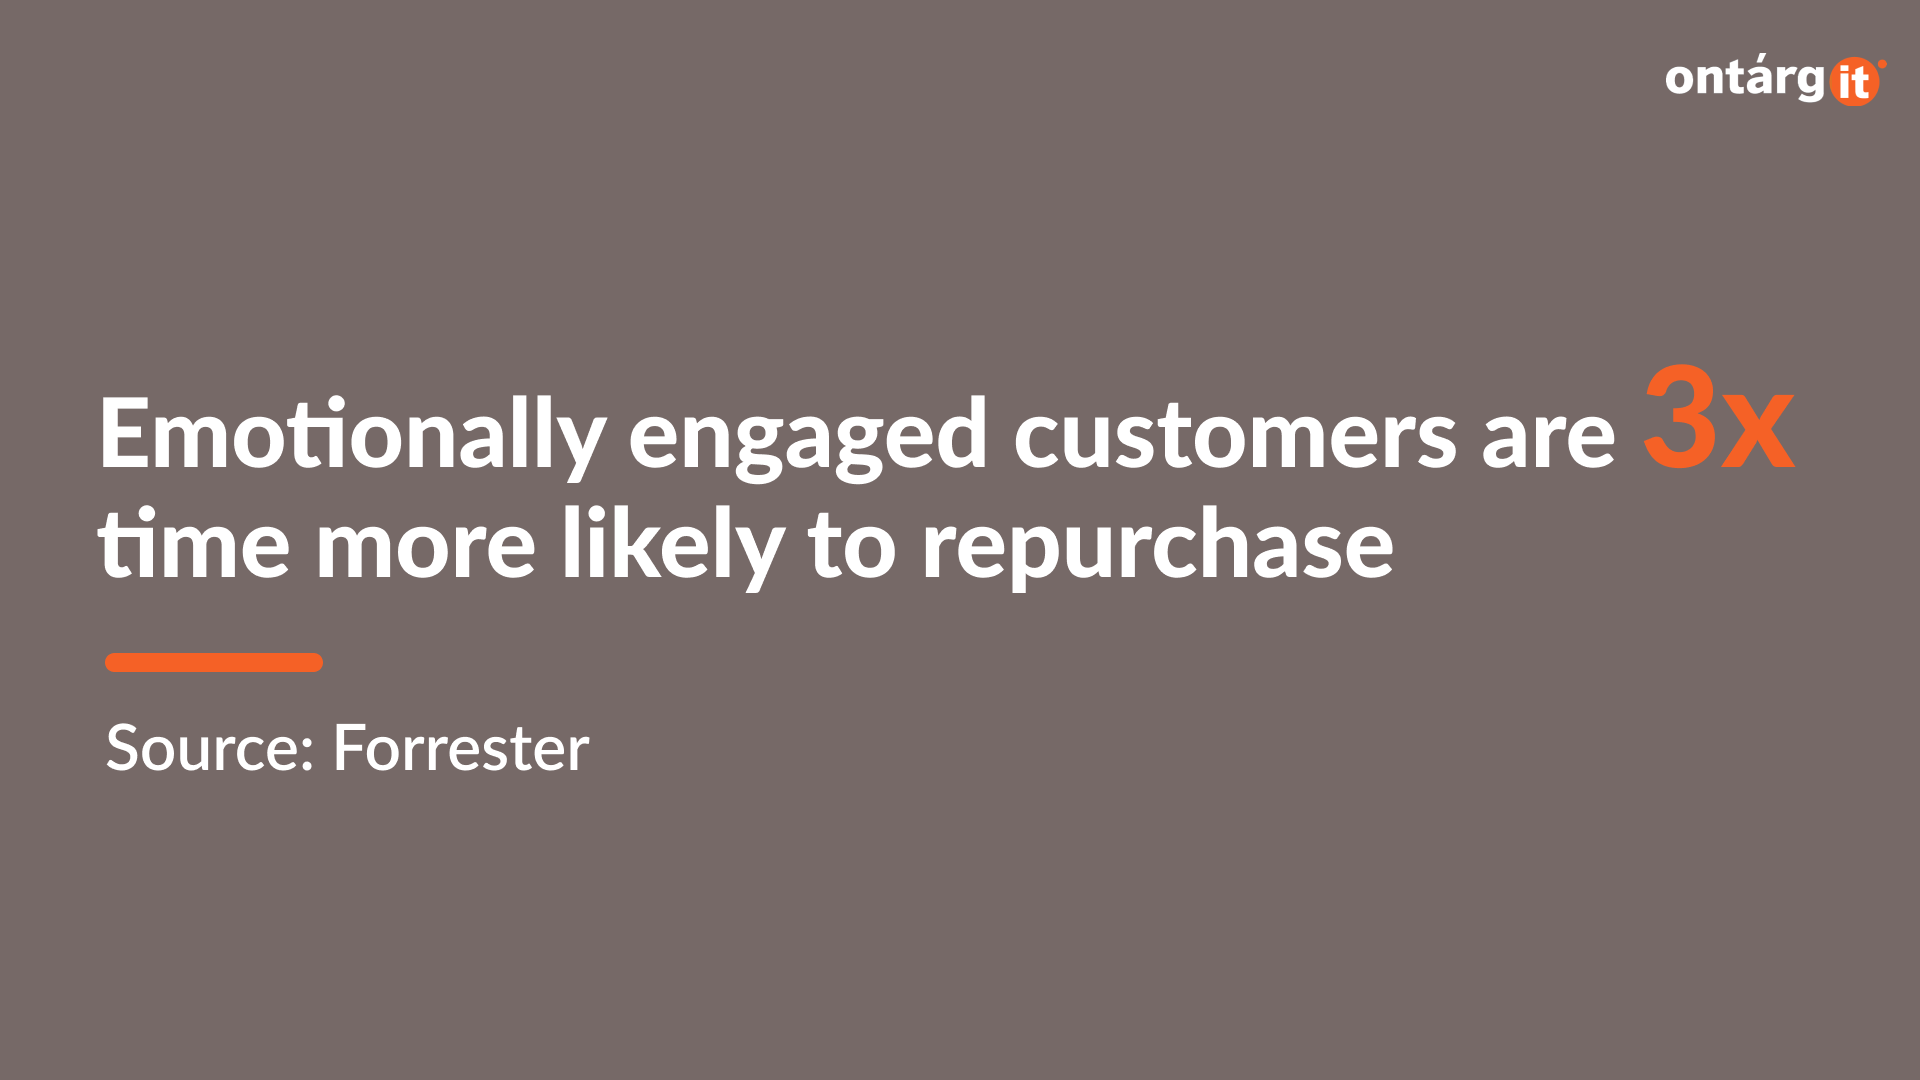 Emotionally engaged customers are 3x time more likely to repurchase